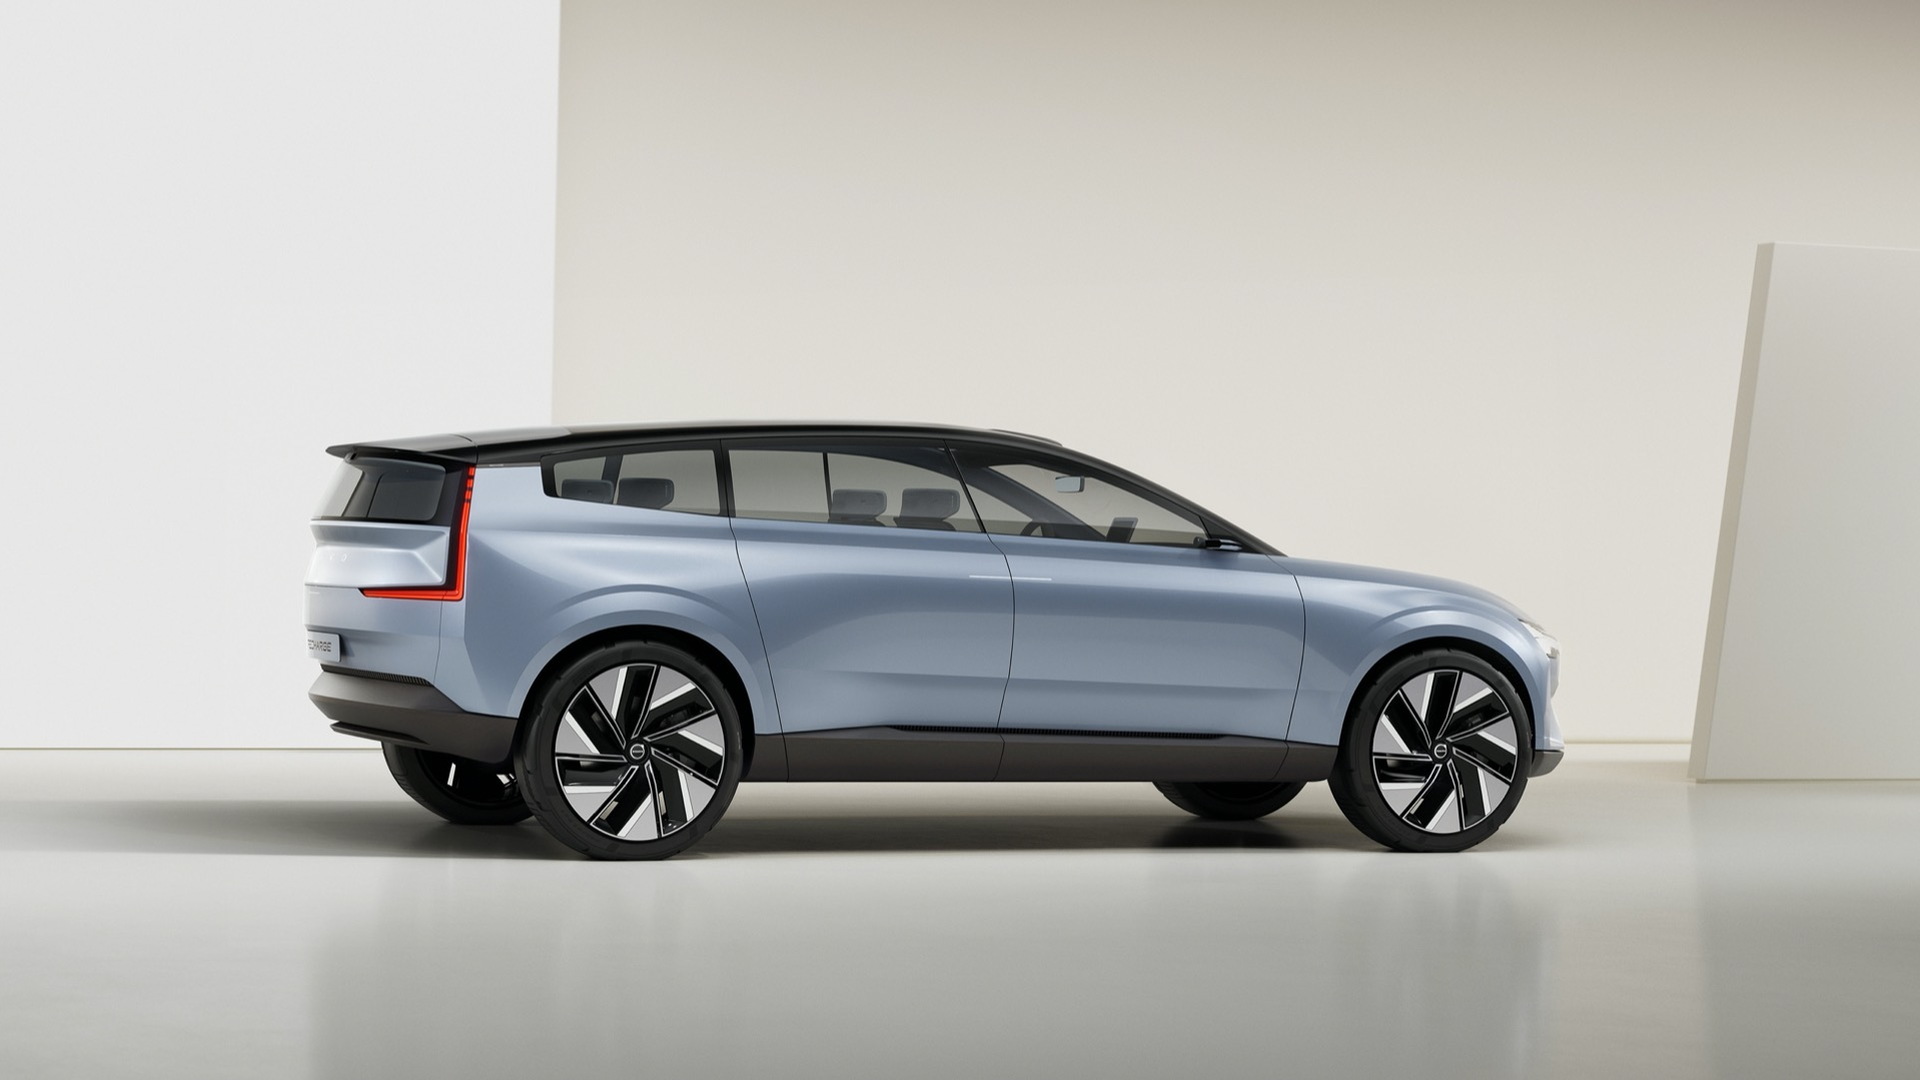 Volvo Cars Leads the Way in Sustainability and Innovation, Investing Heavily in Recharge Models and Autonomous Vehicles